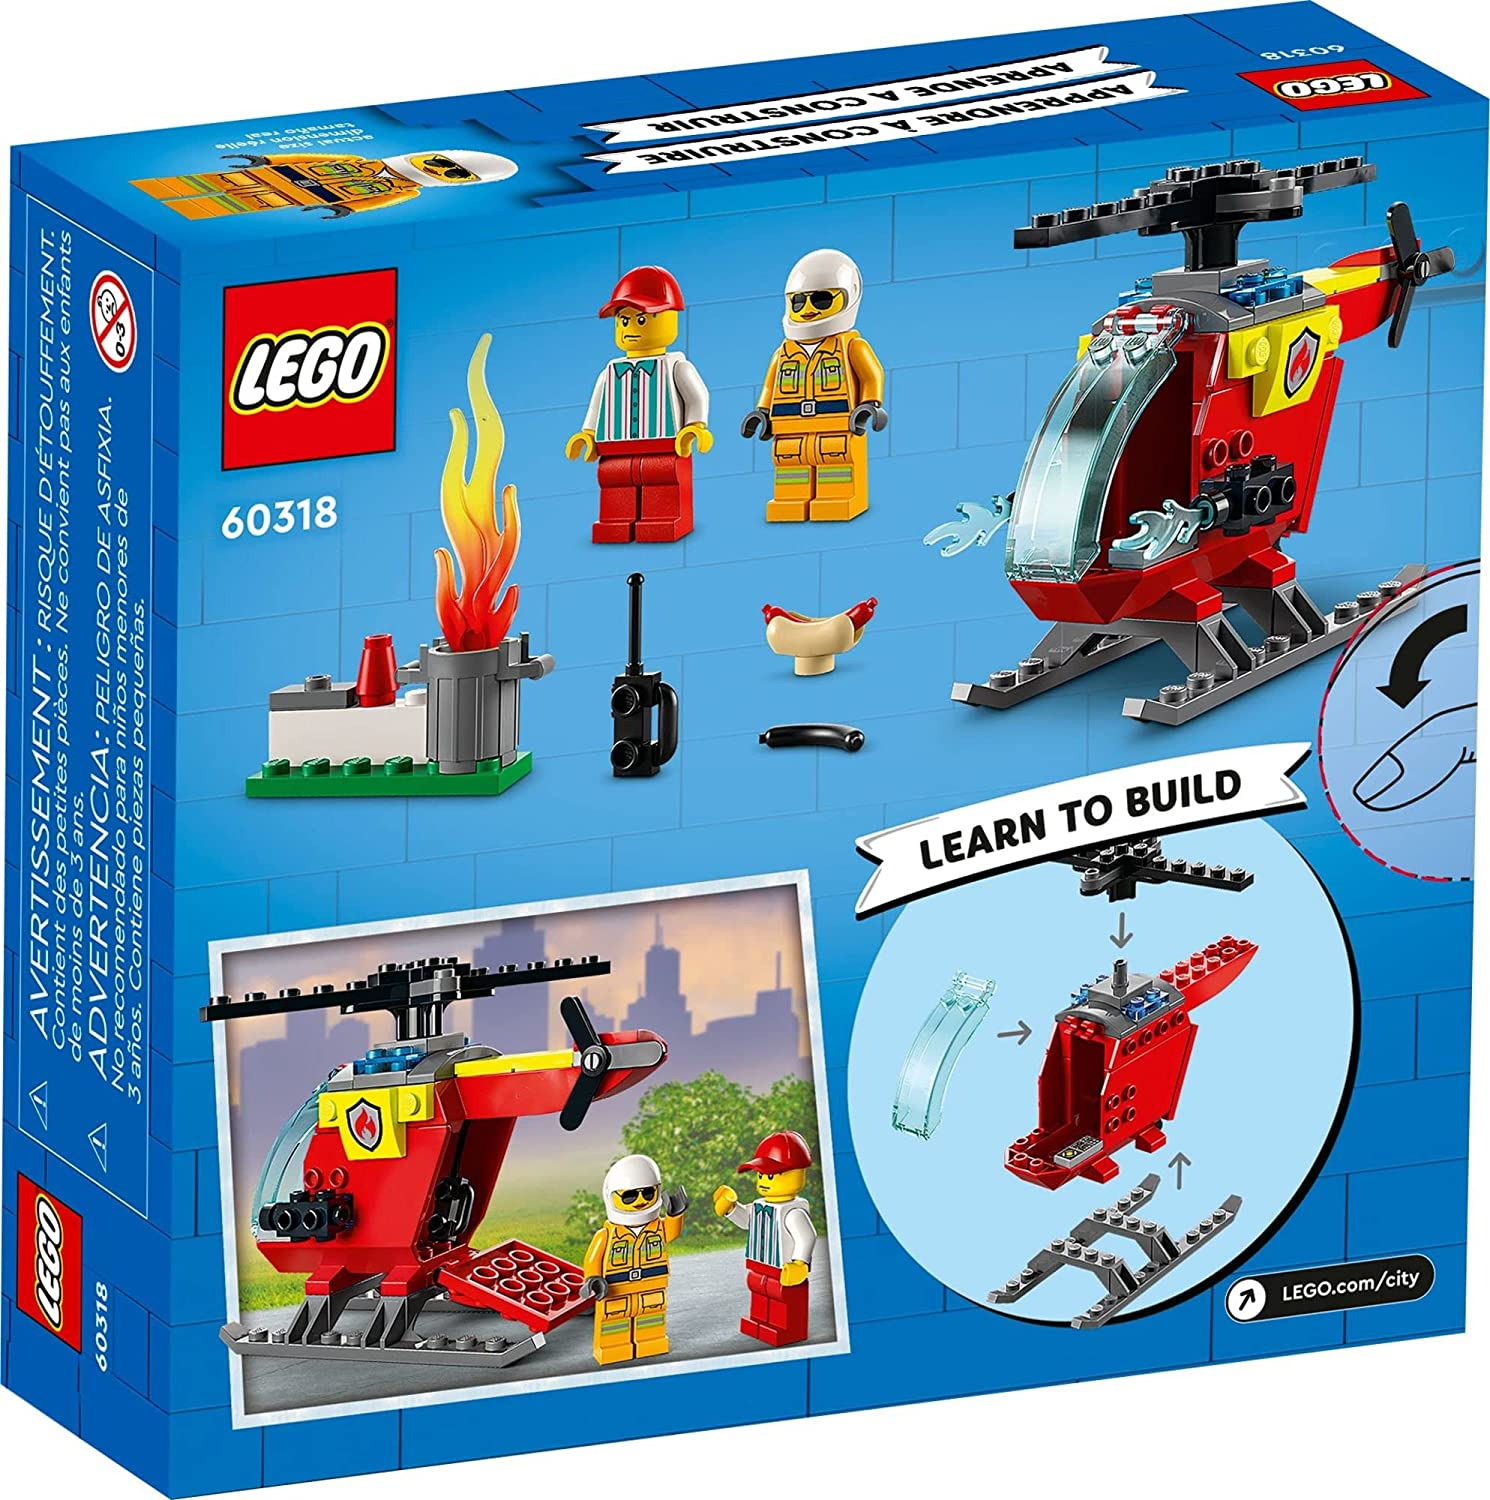 City Fire Helicopter - A2Z Science & Learning Toy Store